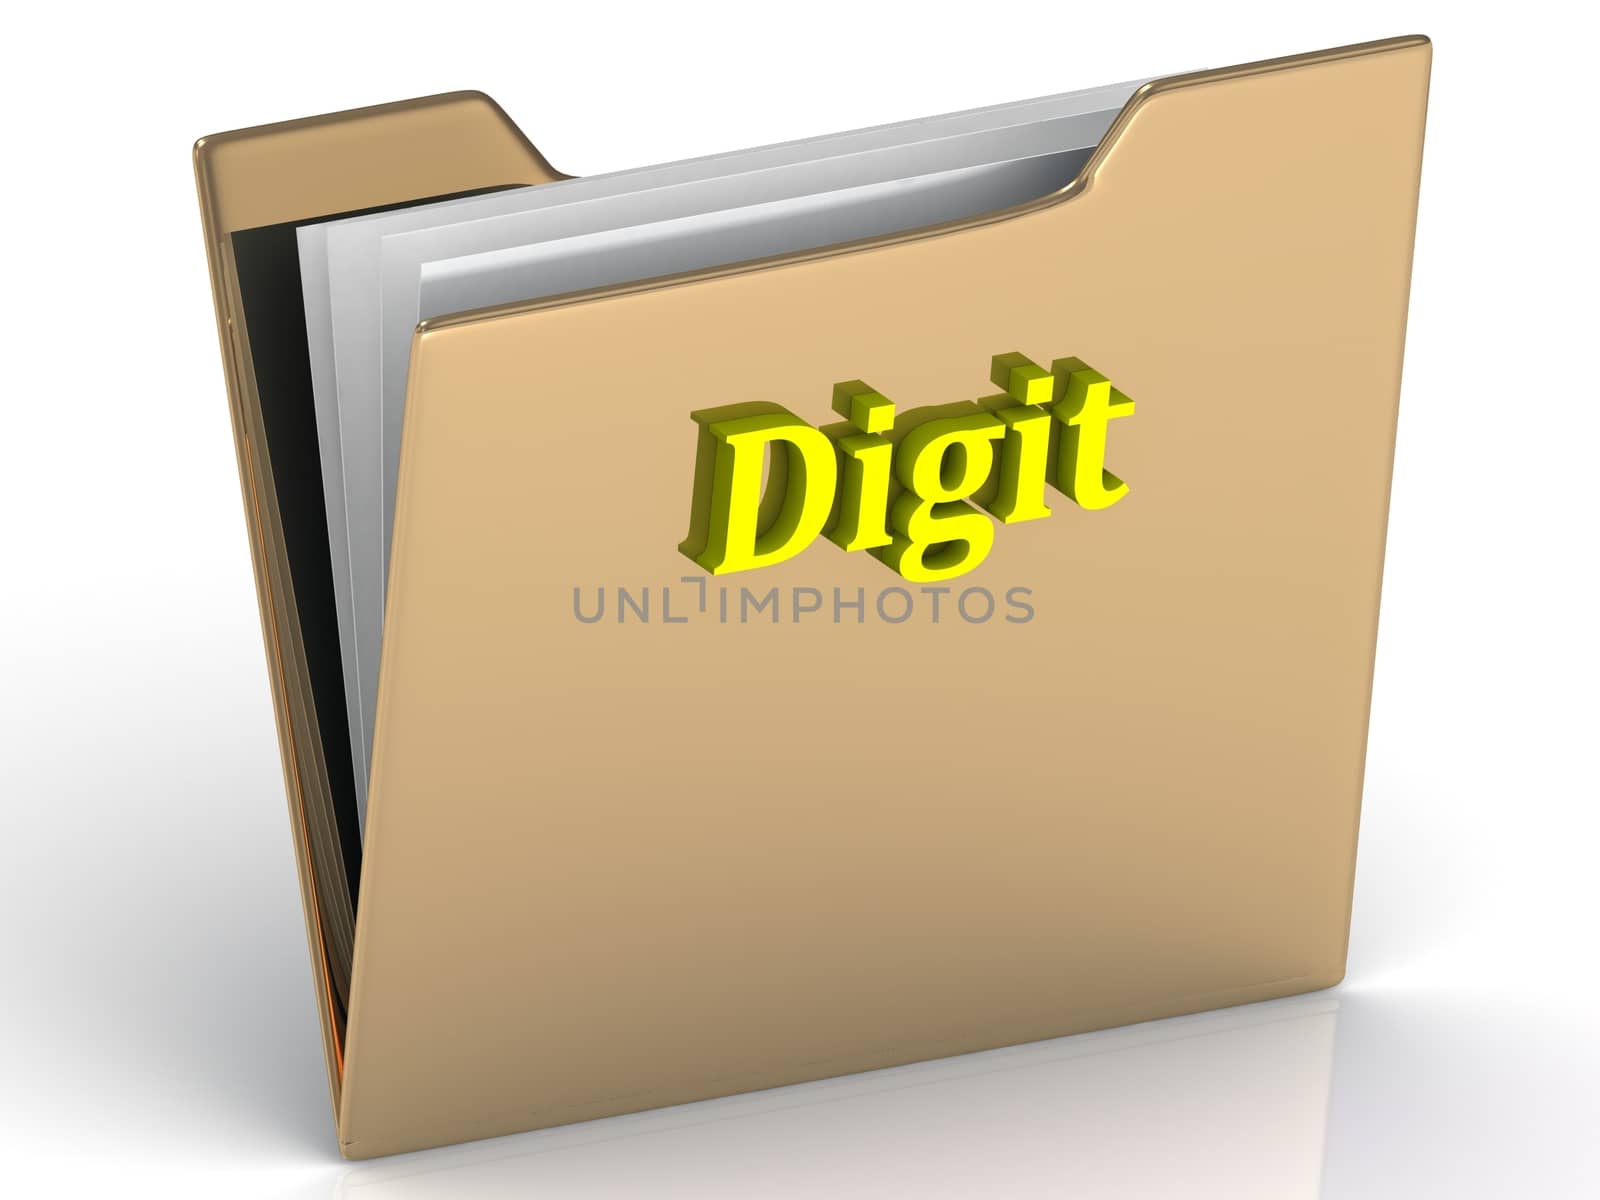 Digit- bright color letters on a gold folder on a white background